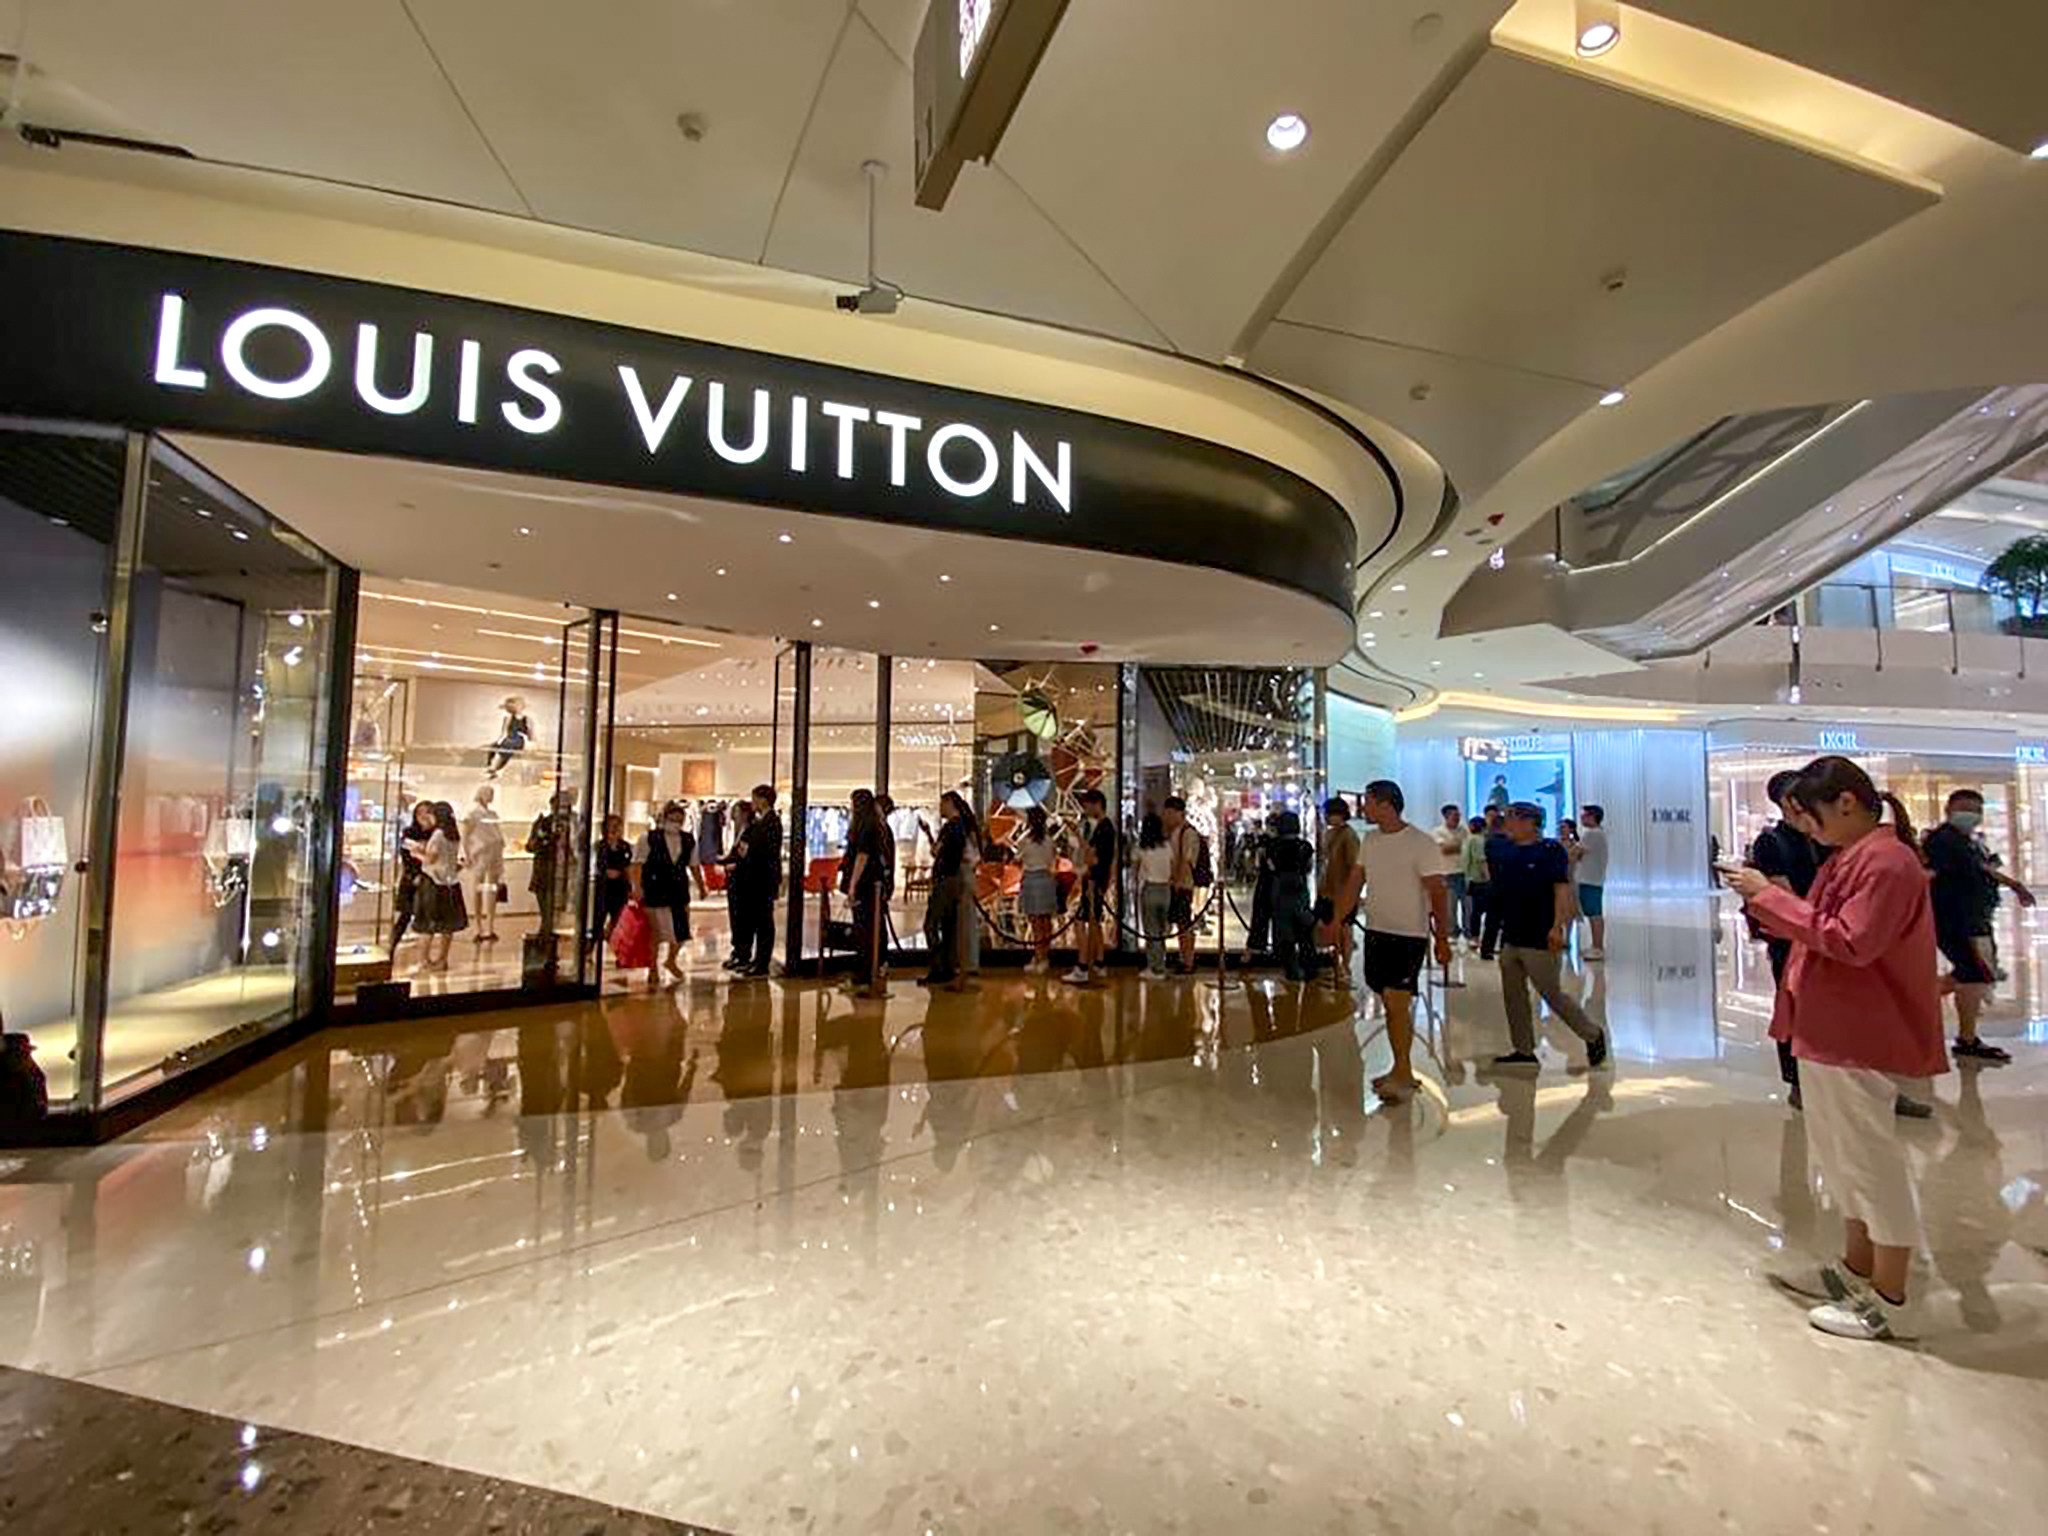 Shoppers line up outside the Louis Vuitton shop in a Shanghai mall on the day LVMH chairman Bernard Arnault visited.  Photo: Handout